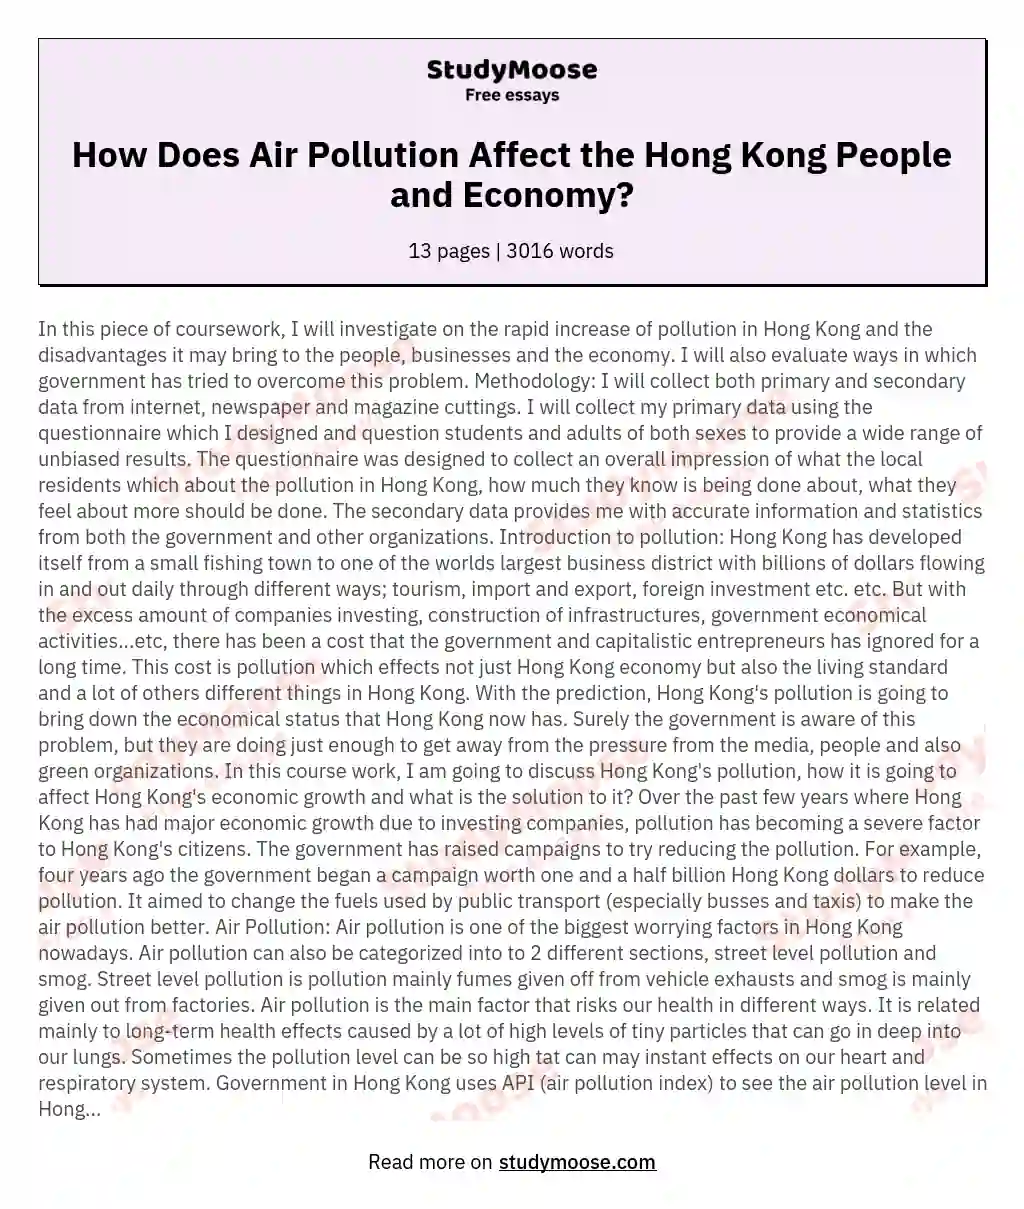 How Does Air Pollution Affect the Hong Kong People and Economy?